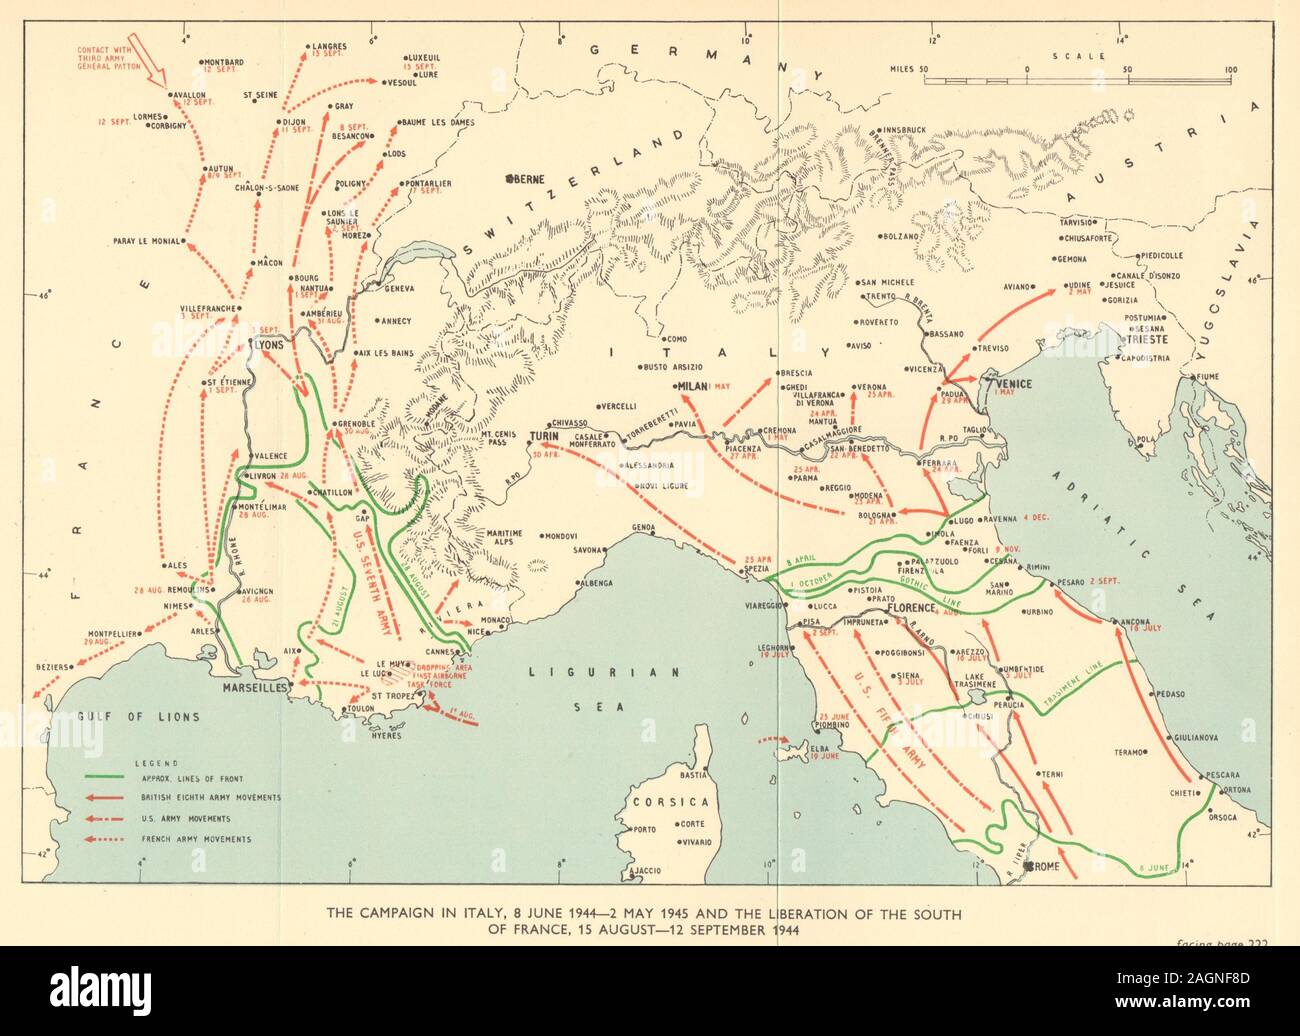 Campaign in Italy & South of France June 1944 - Sept 1945. World War 2 1954 map Stock Photo